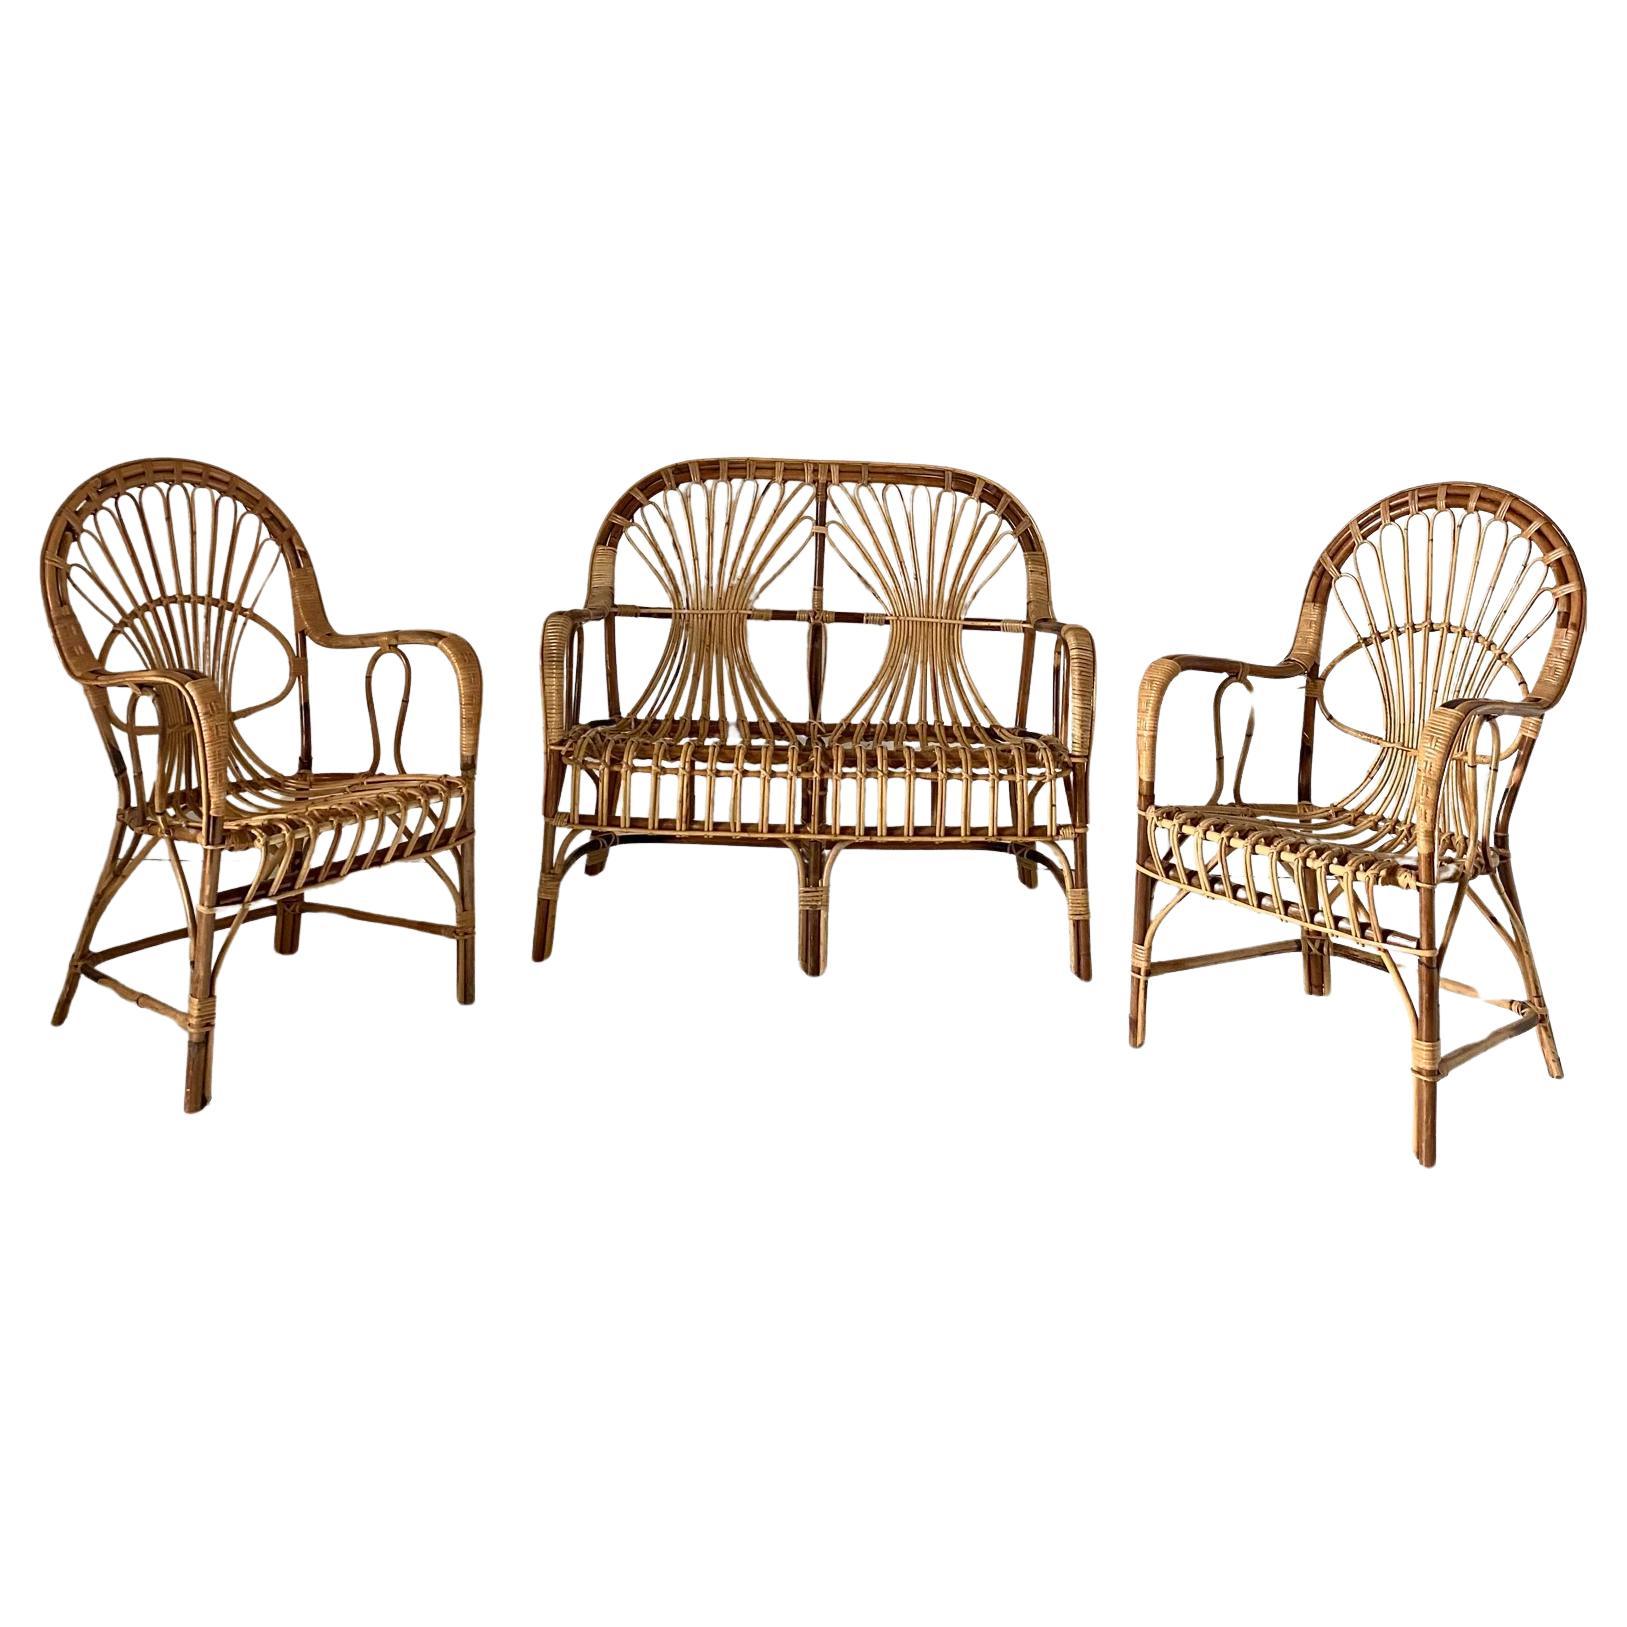 A beautiful 1960's attributed to Franco Albini style,Mid-century rattan and curved bamboo Italian set composed by a two seats sofa and two armchairs.  Finely hand made manufactured items, made with rattan and curved bamboo. Iconic italian piece of